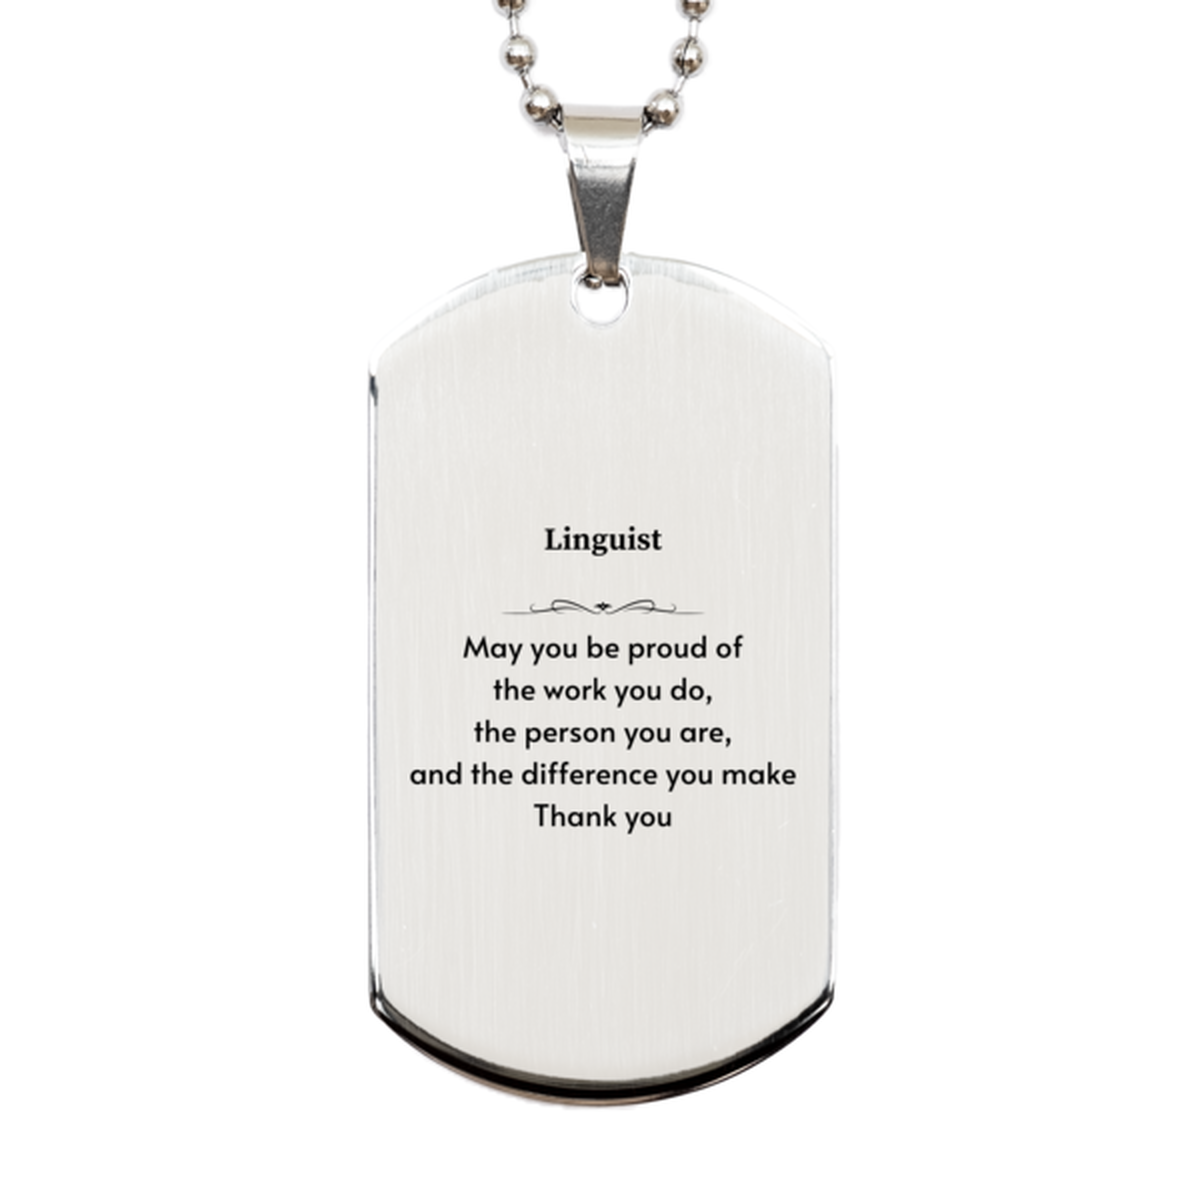 Heartwarming Silver Dog Tag Retirement Coworkers Gifts for Linguist, Linguist May You be proud of the work you do, the person you are Gifts for Boss Men Women Friends